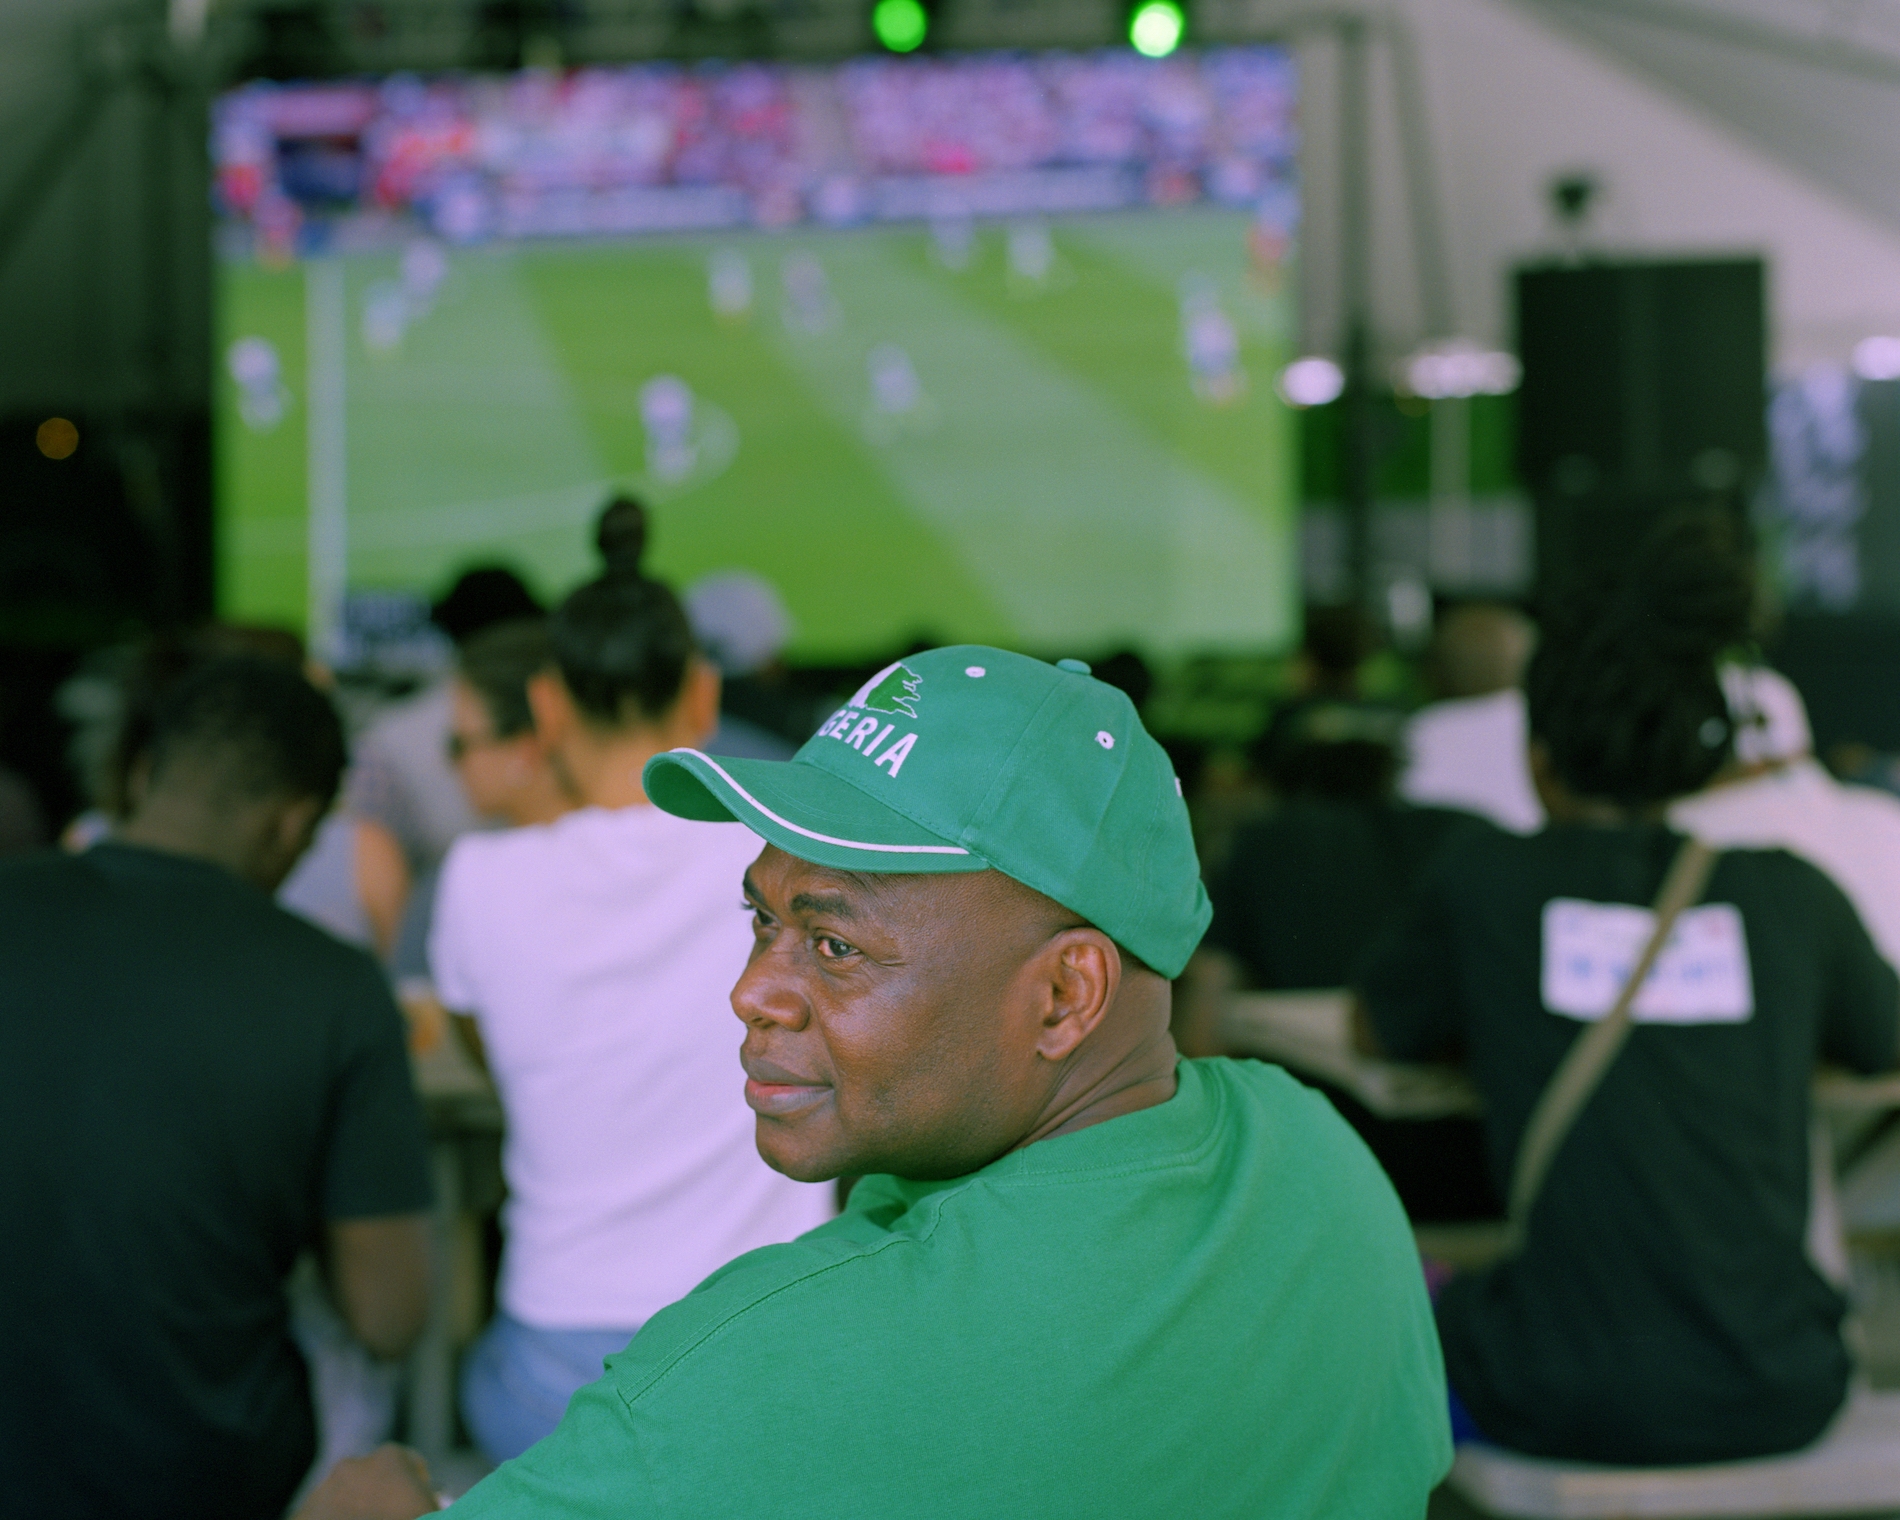 A fan watching a friendly match between Nigeria and England in Brooklyn, ahead of the 2018 World Cup.